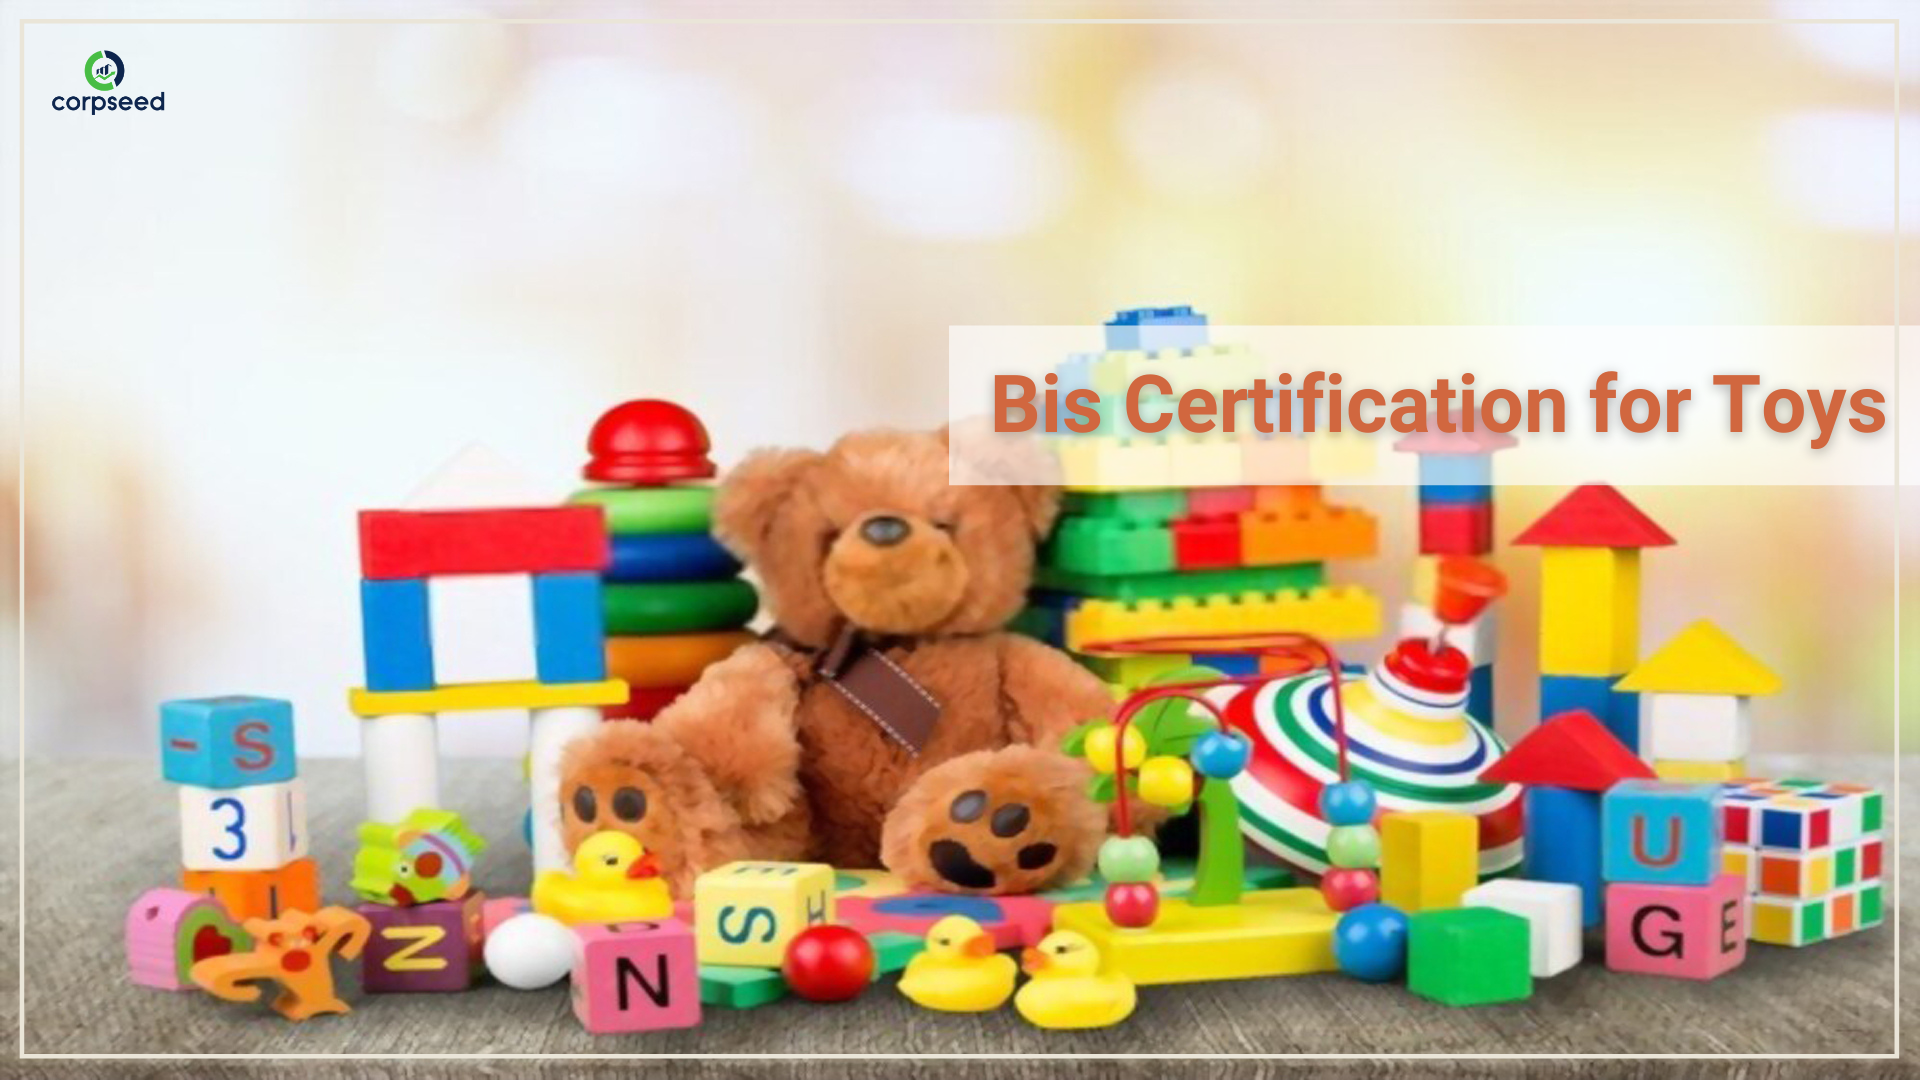 Bis Certification for Toys - Corpseed.png